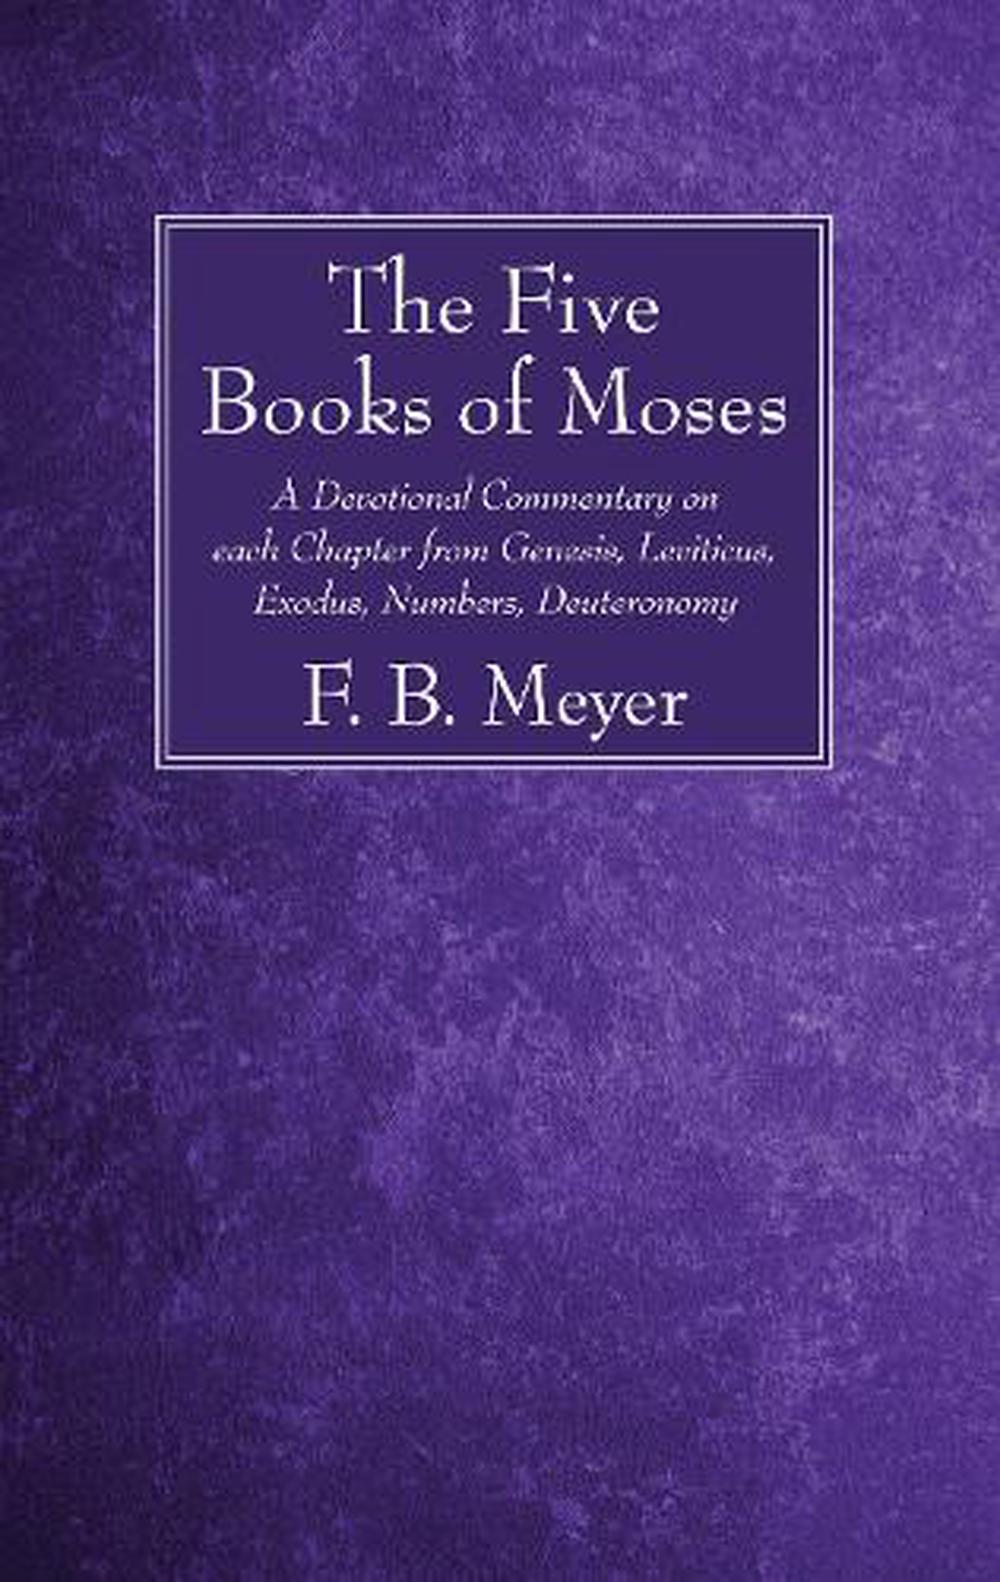 what are 5 books of moses